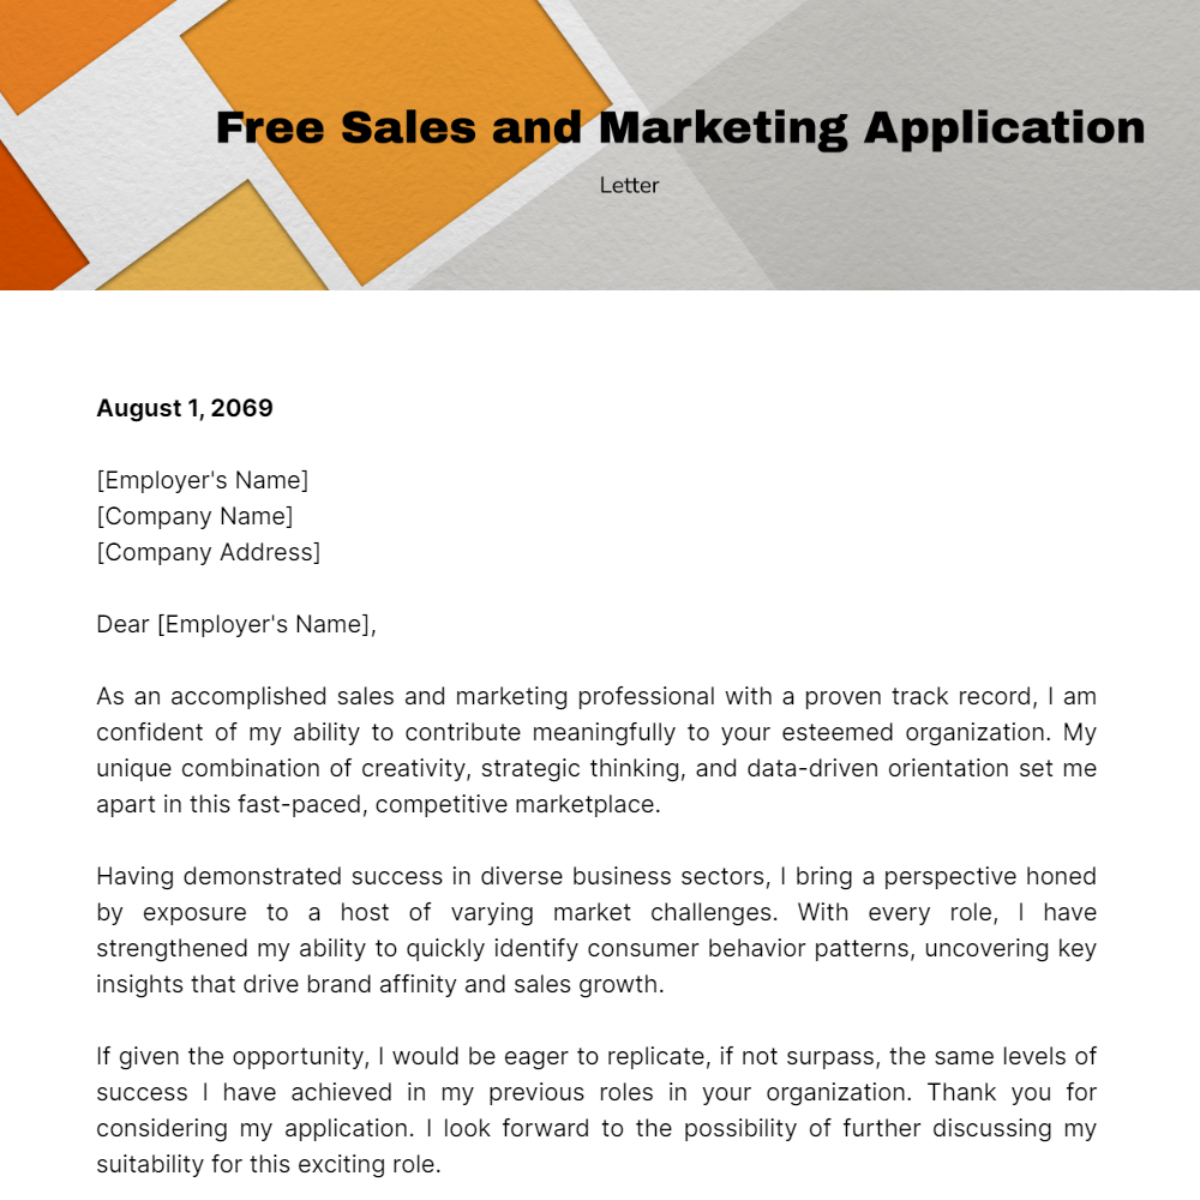 Sales and Marketing Application Letter Template